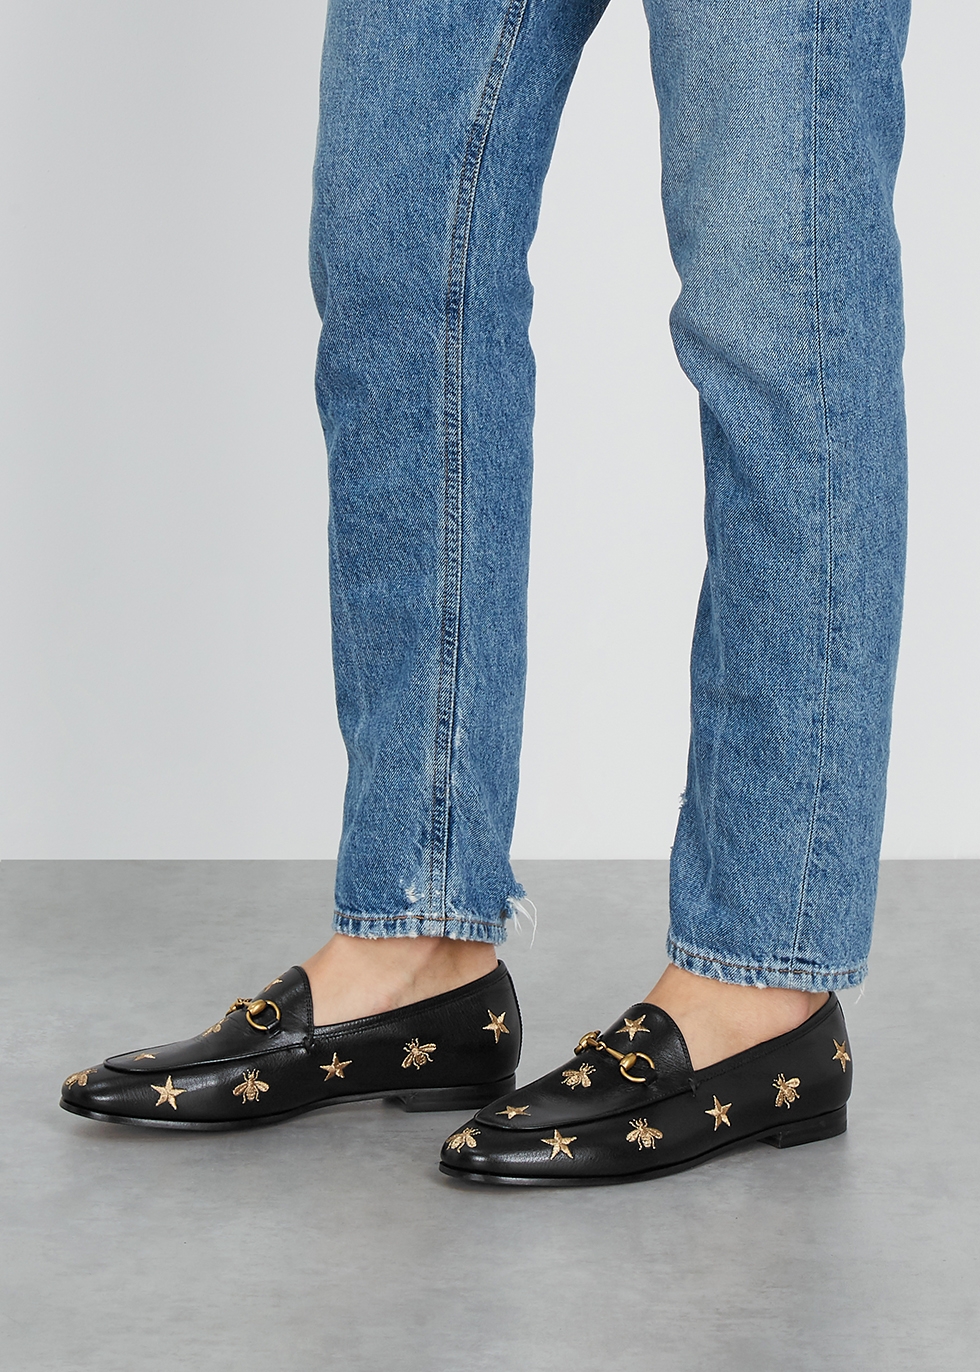 black and gold gucci loafers